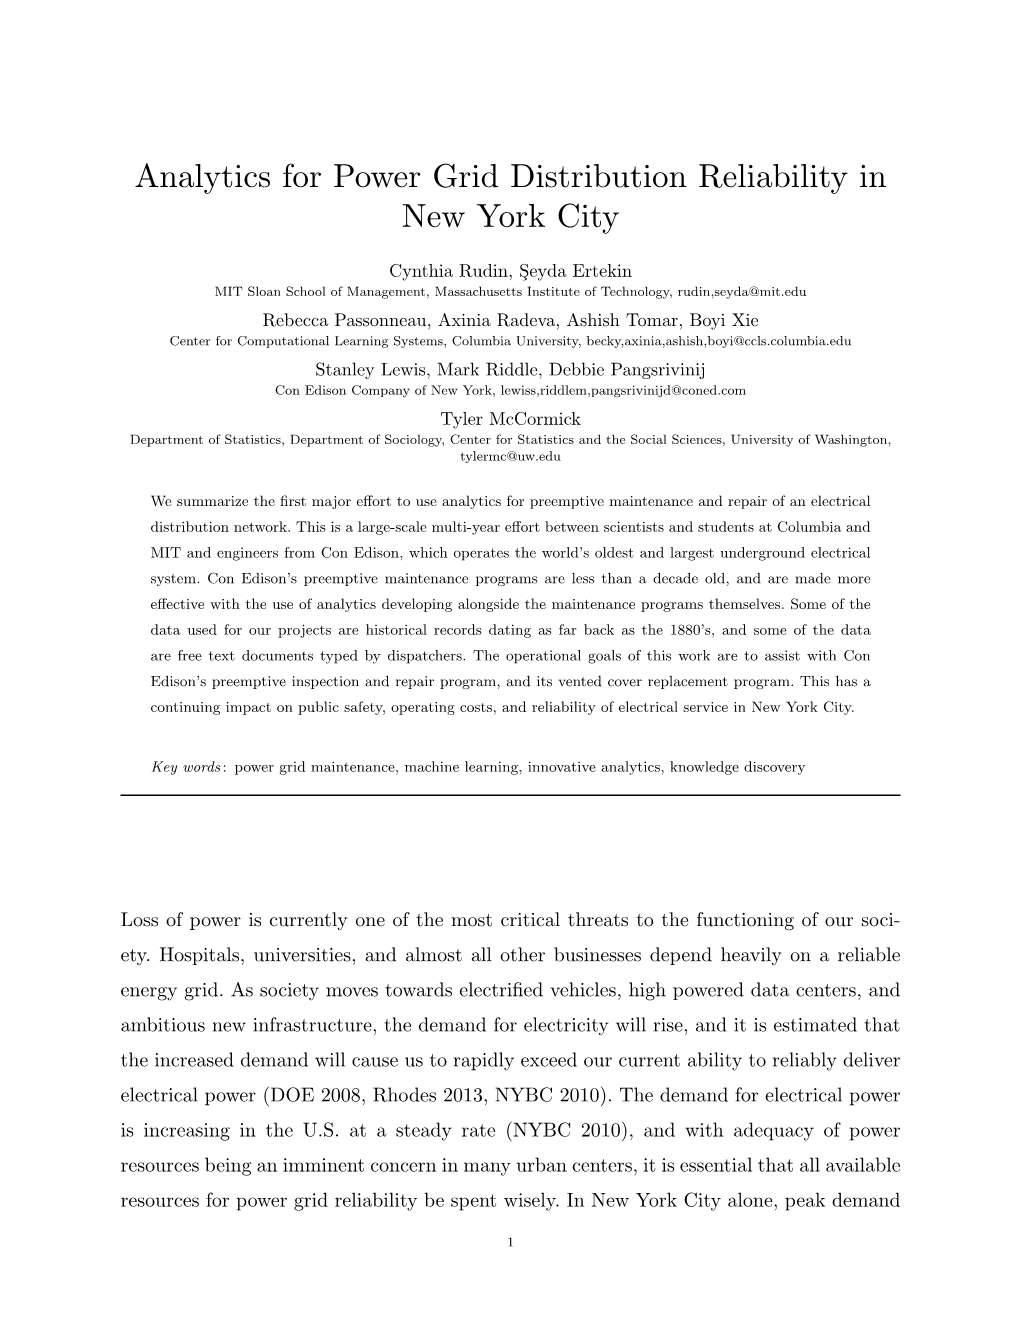 Analytics for Power Grid Distribution Reliability in New York City